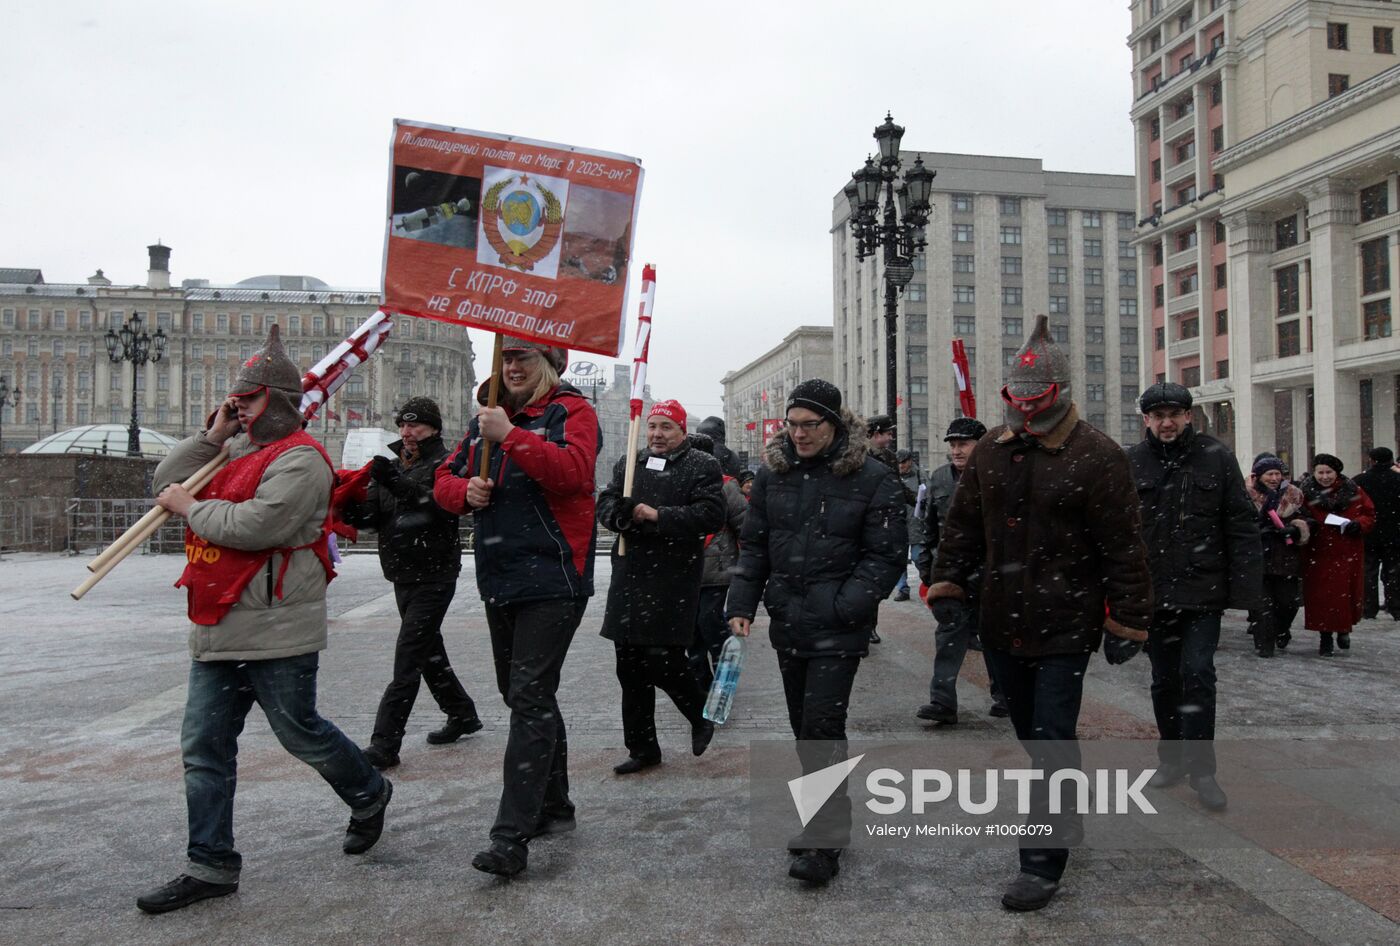 Communist Party stages protest rally on Manezh Square